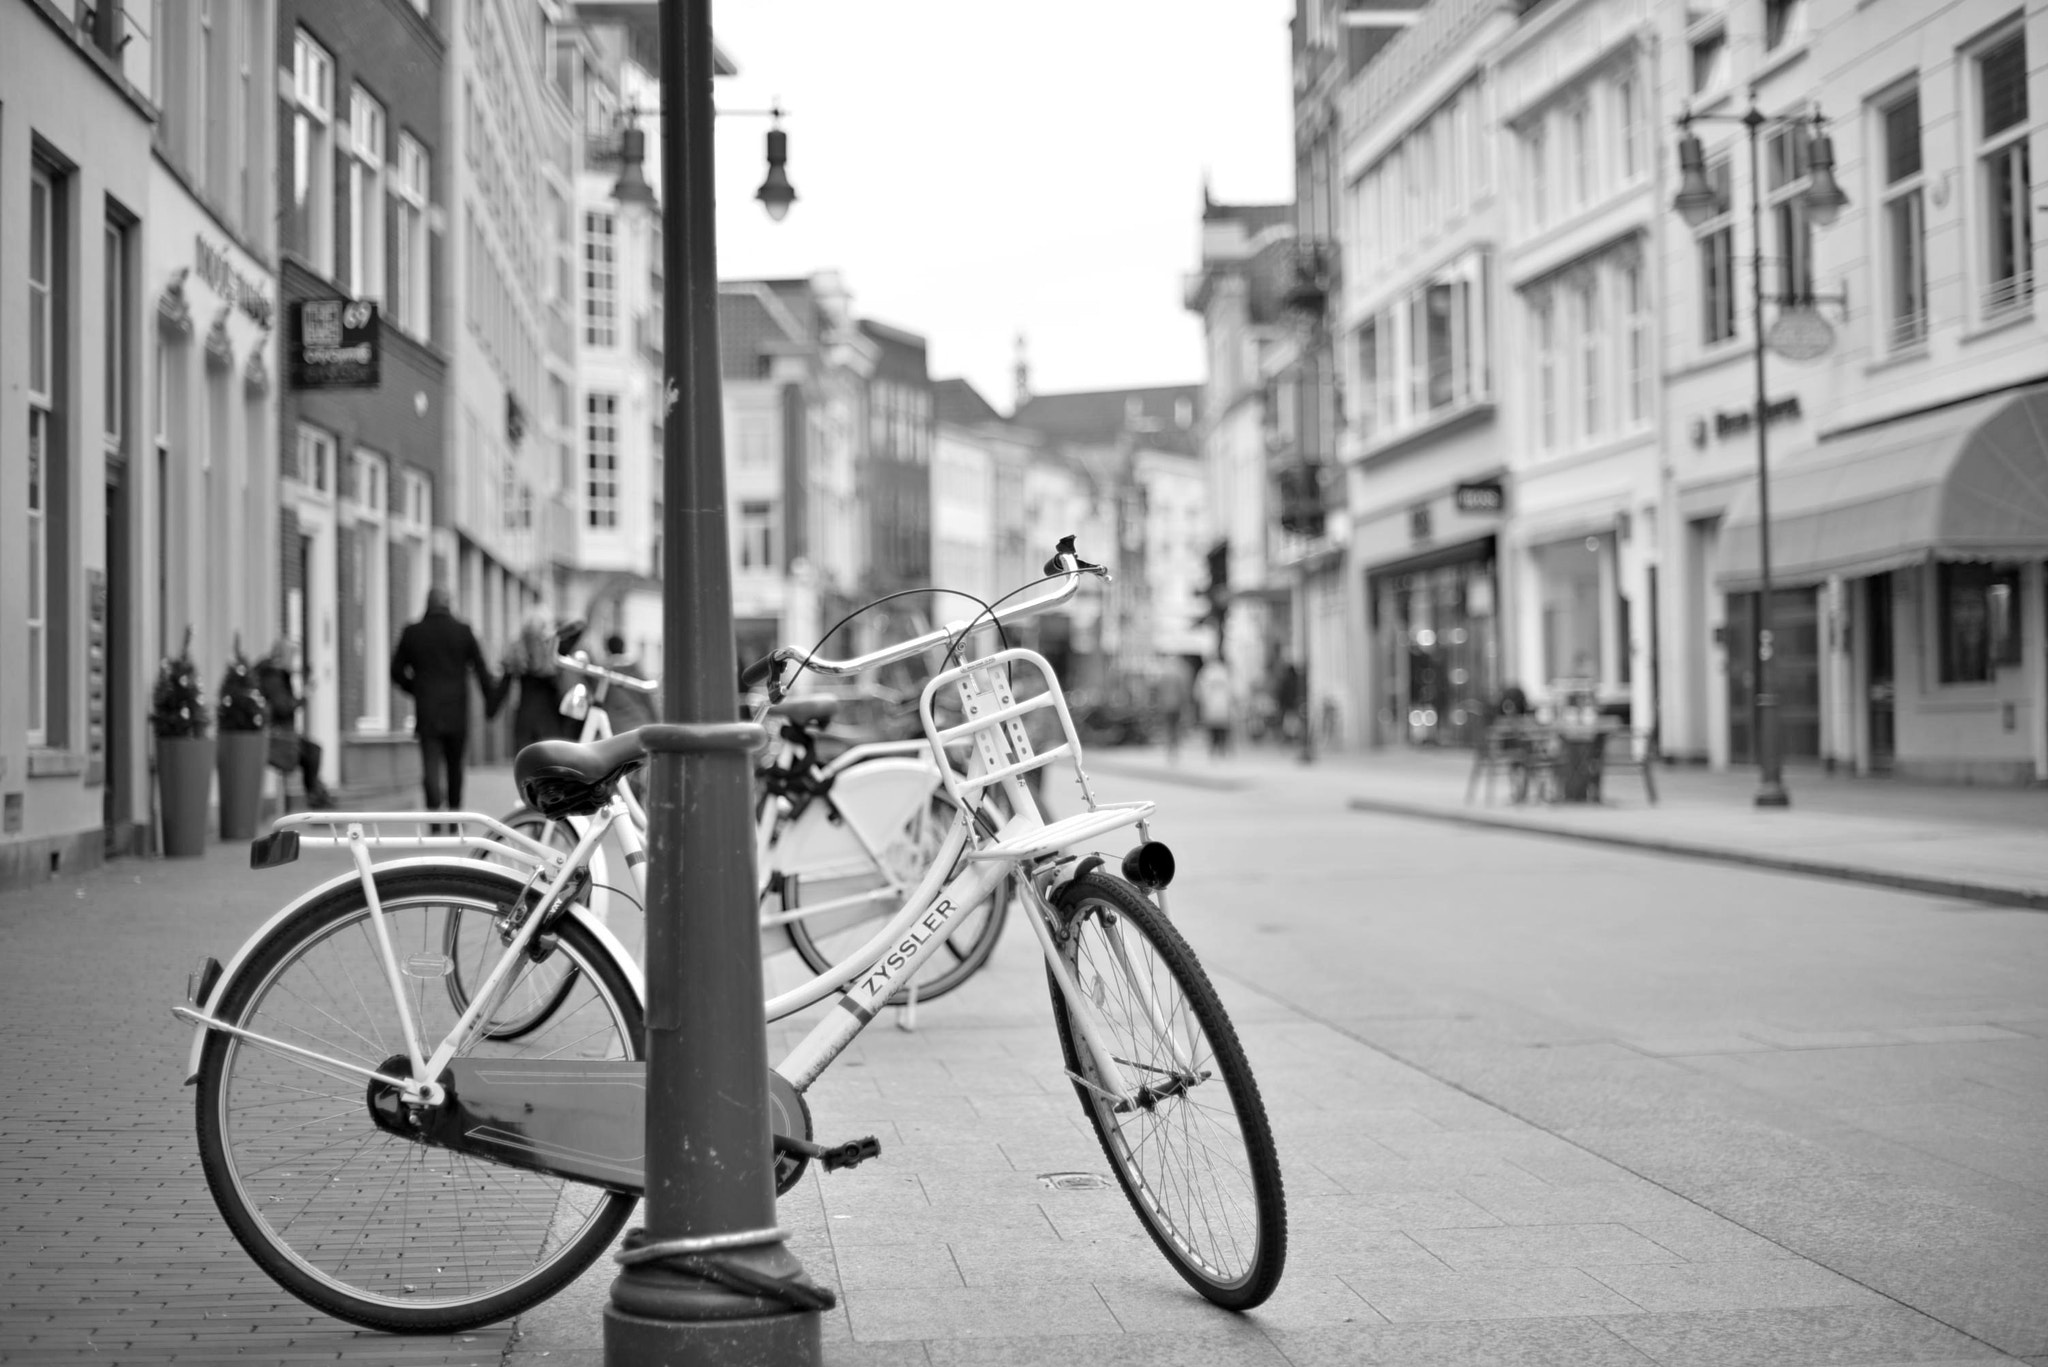 Nikon D610 sample photo. One of the dutch cozy streets during a weekend. bicycles, couples, old architecture... photography